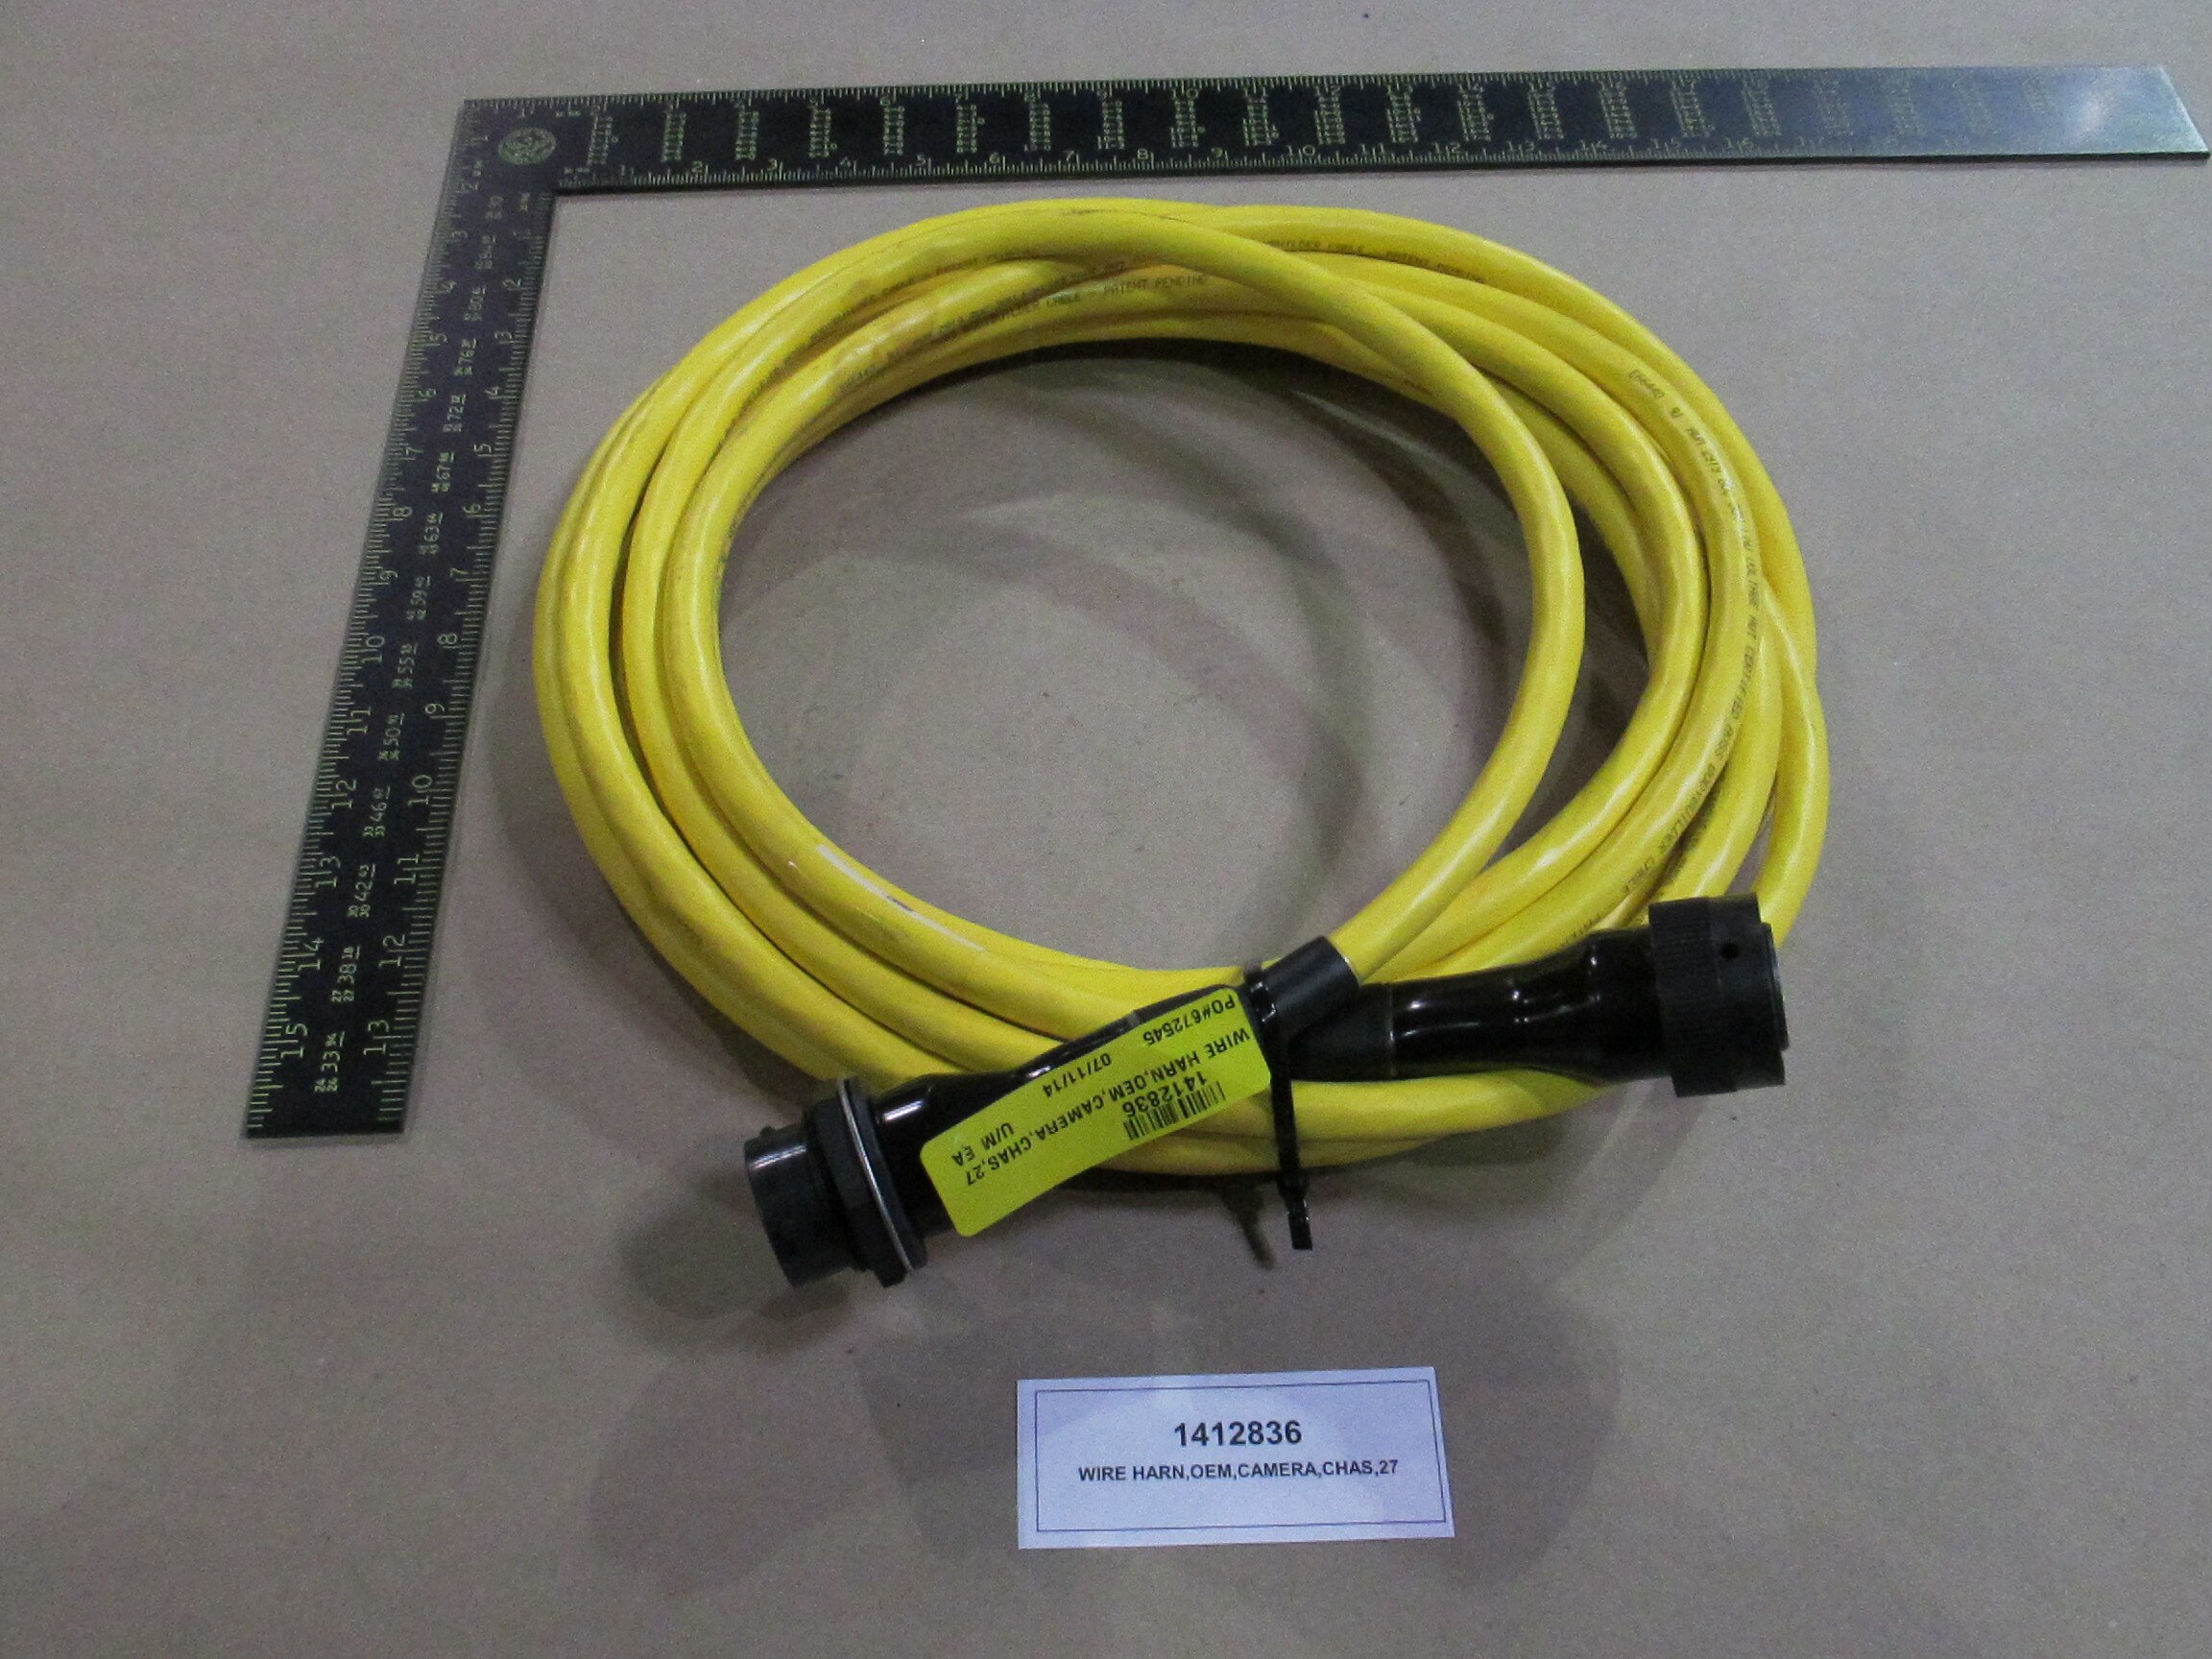 WIRE HARN,OEM,CAMERA,CHAS,27